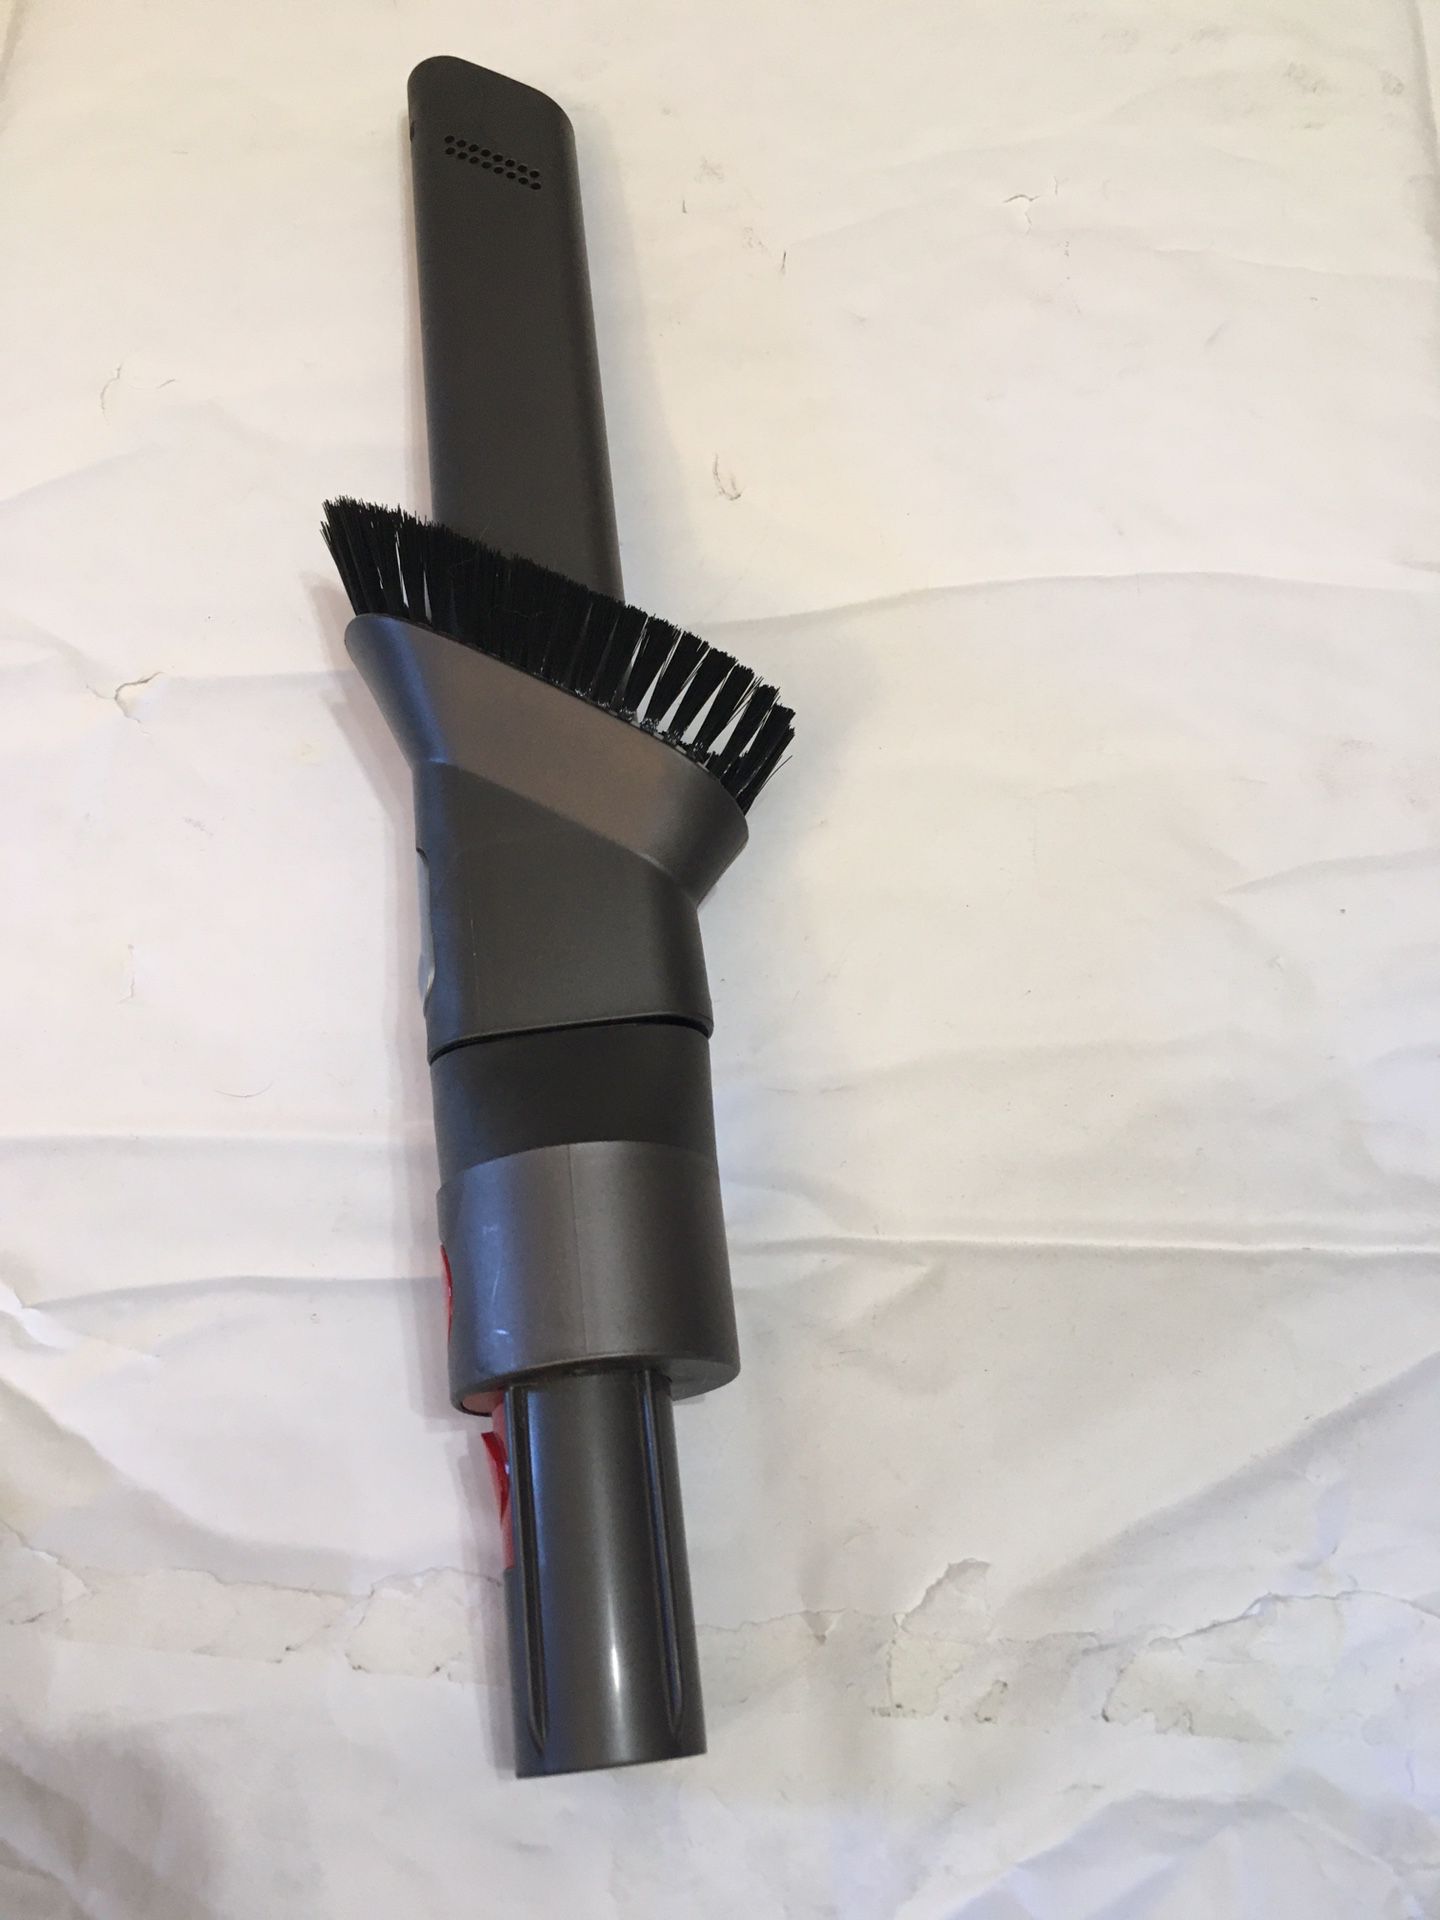 Dyson GENUINE Crevice Tool For Dyson Omni-Glide Cordless Stick Vacuum - SV19  In used good condition . Will work with Dyson Omni glide sv19 vacuum onl